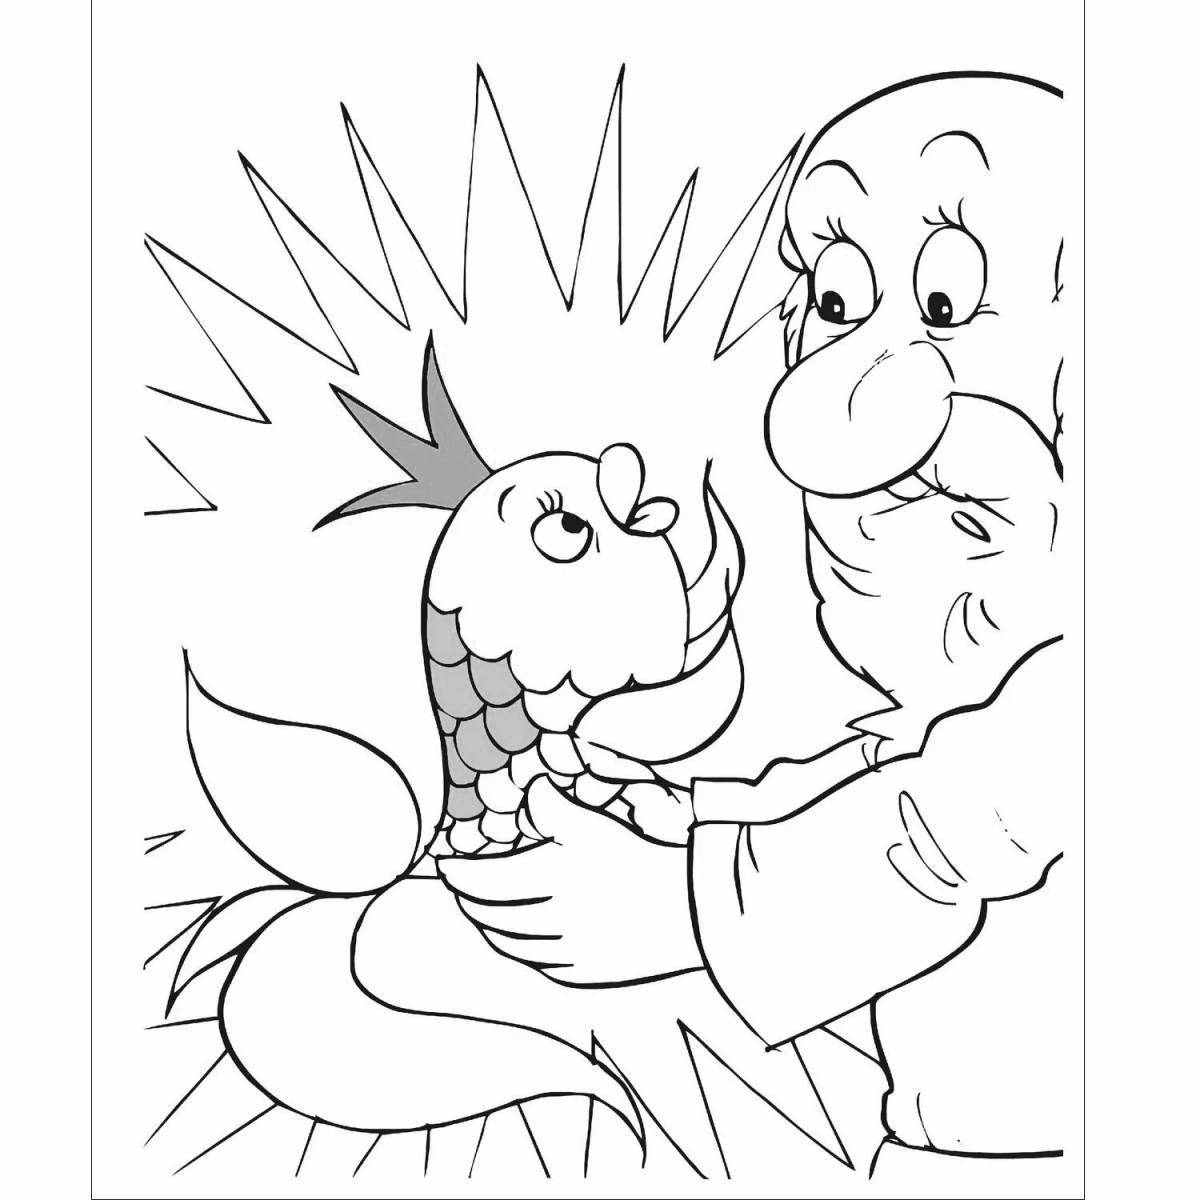 A fascinating coloring book for children 3-4 years old based on Pushkin's fairy tales